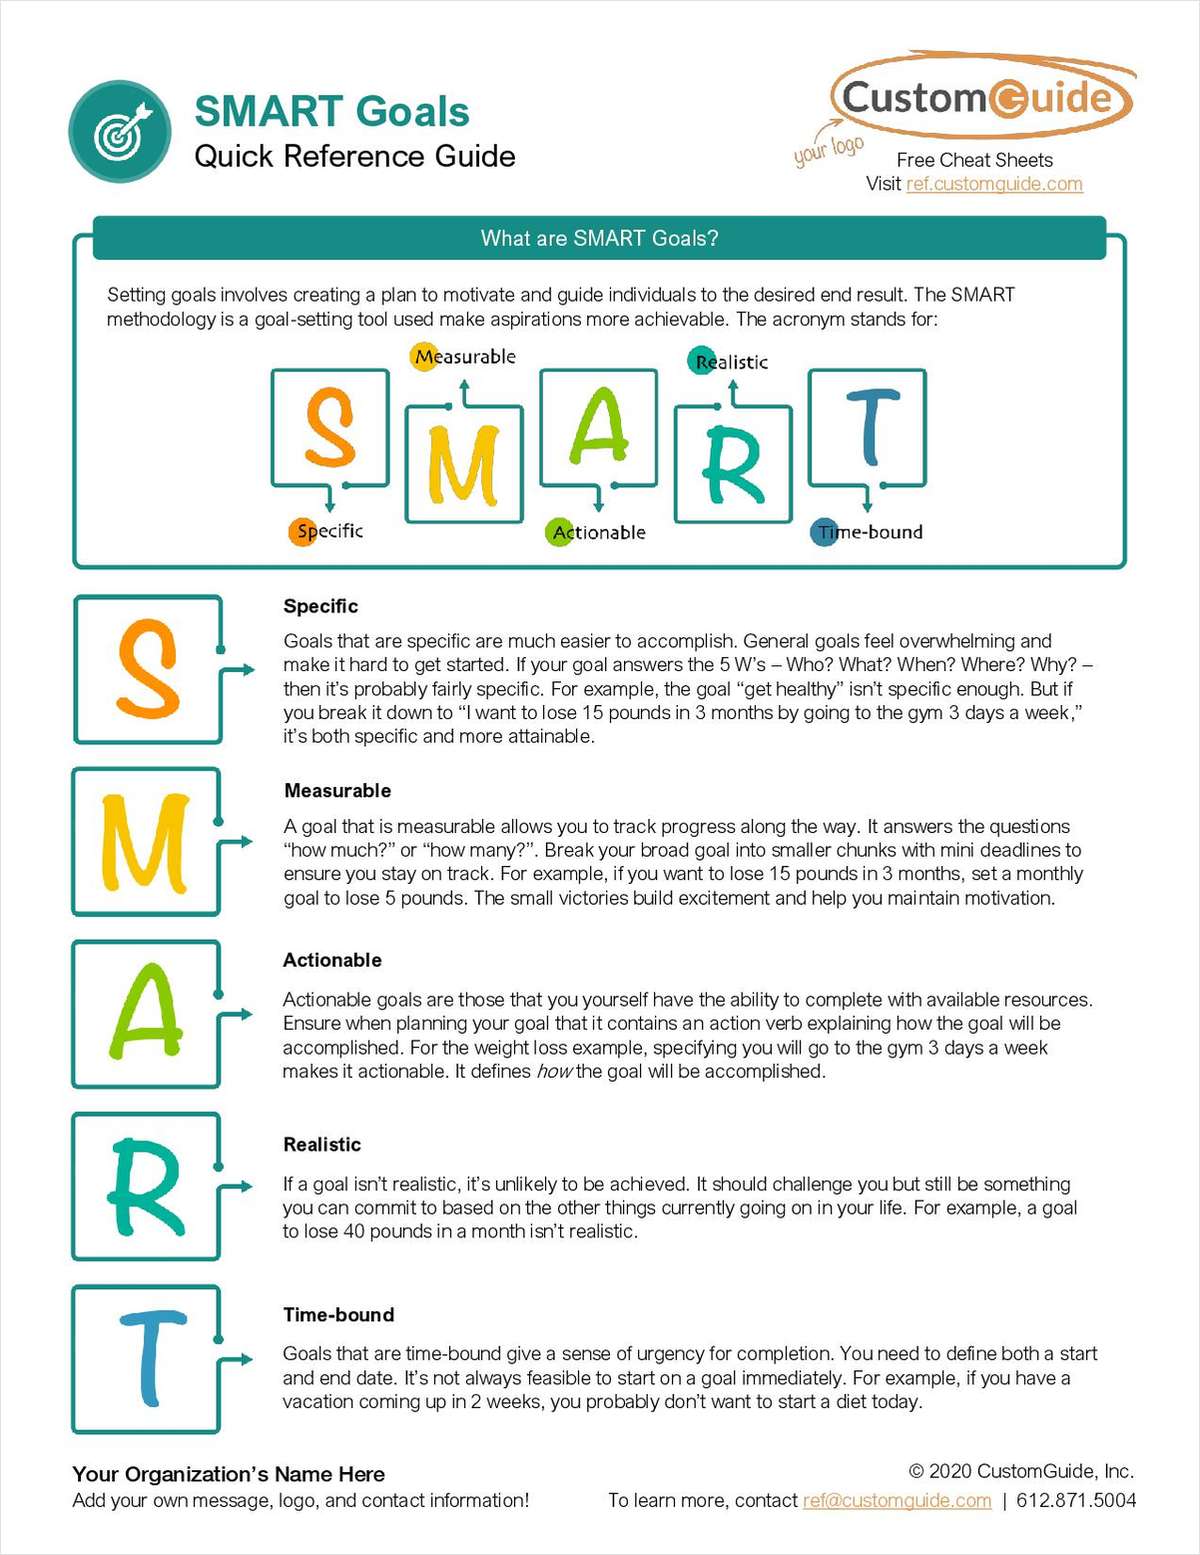 SMART Goals Quick Reference Guide, Free CustomGuide Tips and Tricks Guide